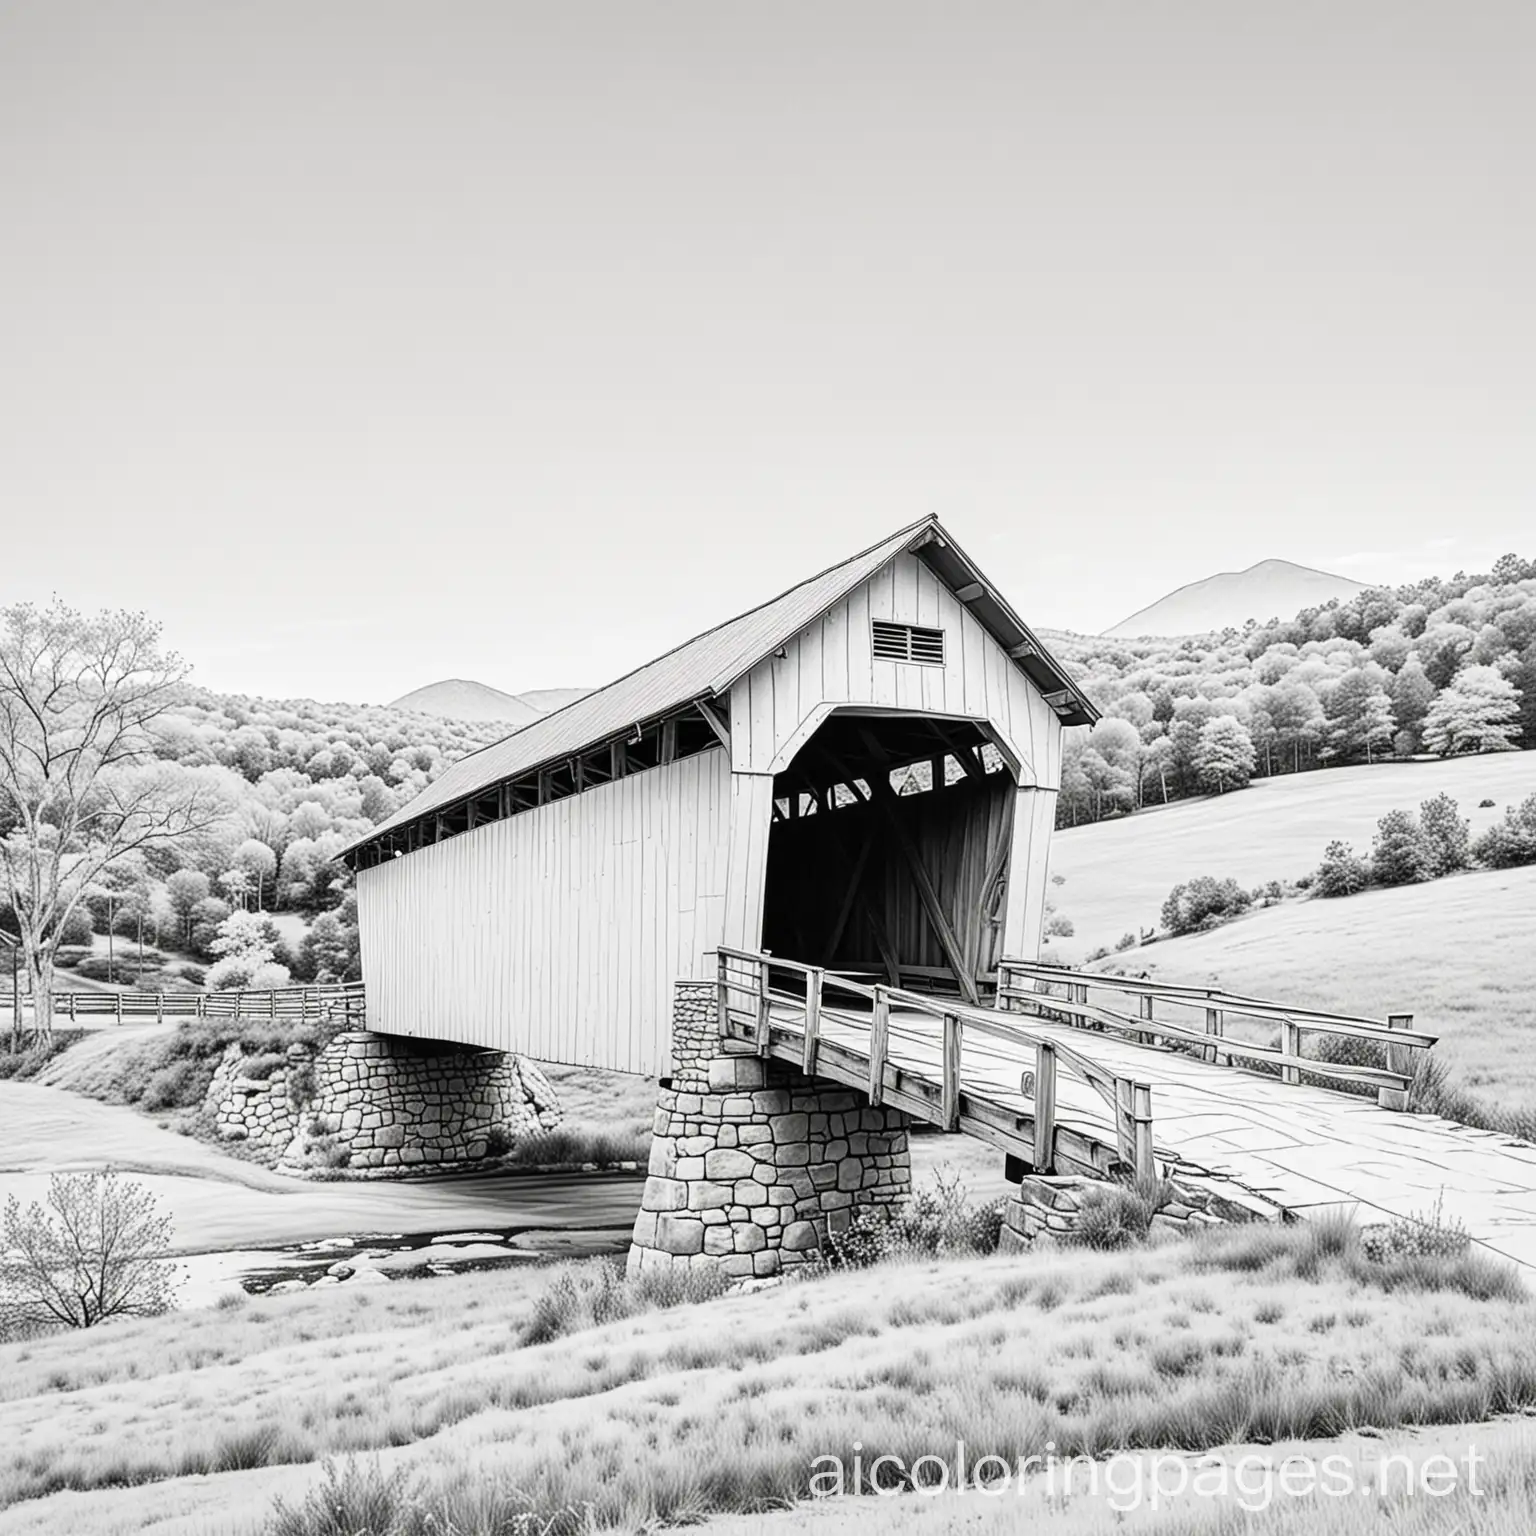 a covered bridge black and white coloring book page. simple clean lines. with rolling hills behind it., Coloring Page, black and white, line art, white background, Simplicity, Ample White Space